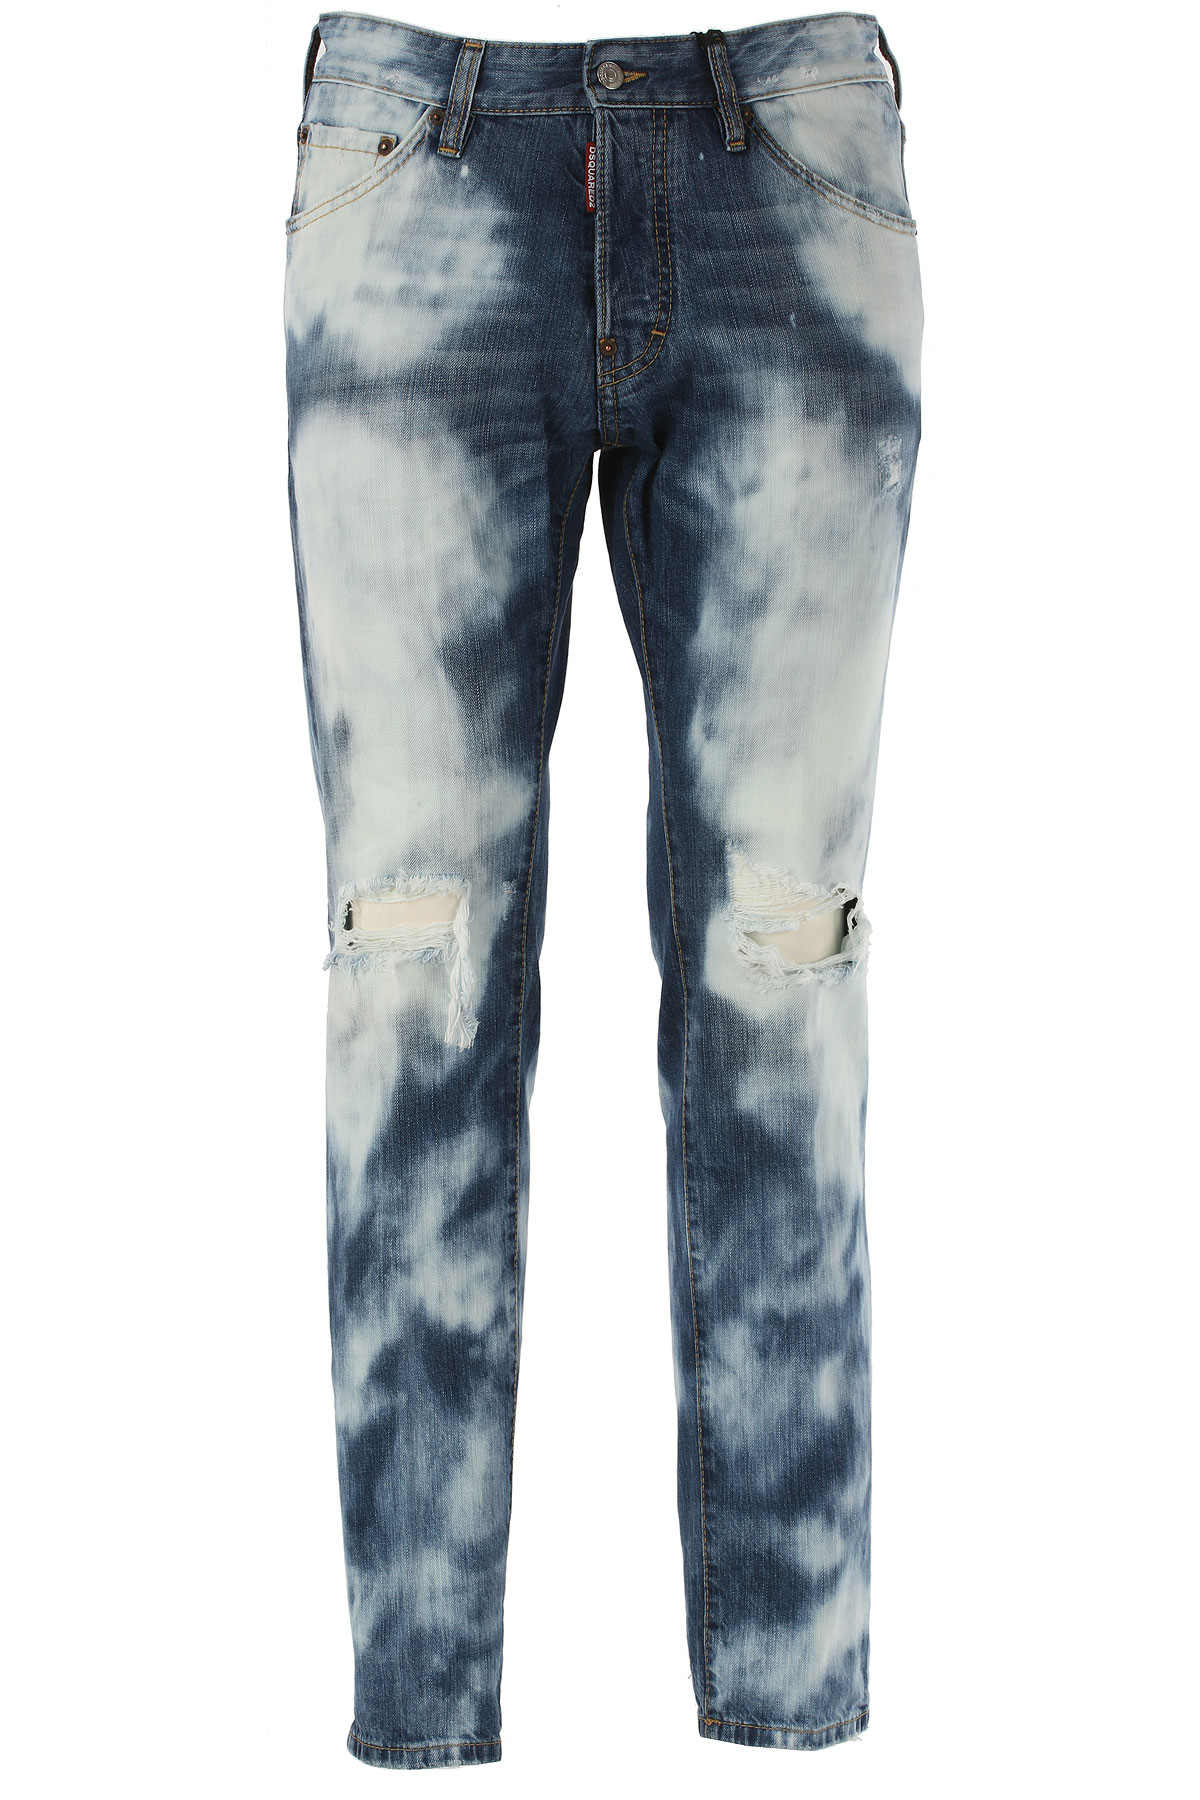 Dsquared Jean Homme Outlet, Cool Guy Jean, Jean, Coton, 2017, 48 50 52 54